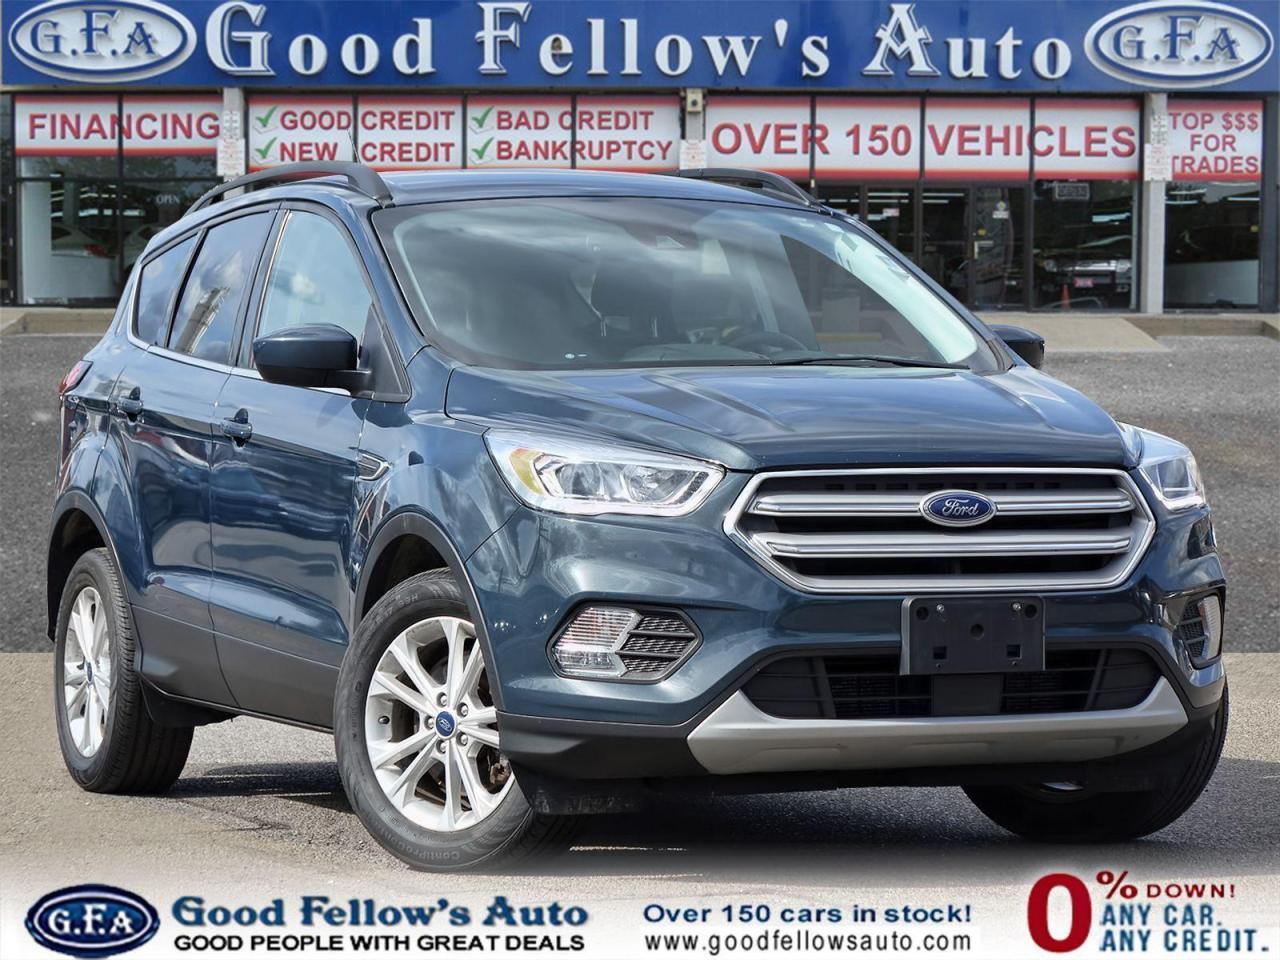 2019 Ford Escape SEL MODEL, ECOBOOST, AWD, LEATHER SEATS, REARVIEW